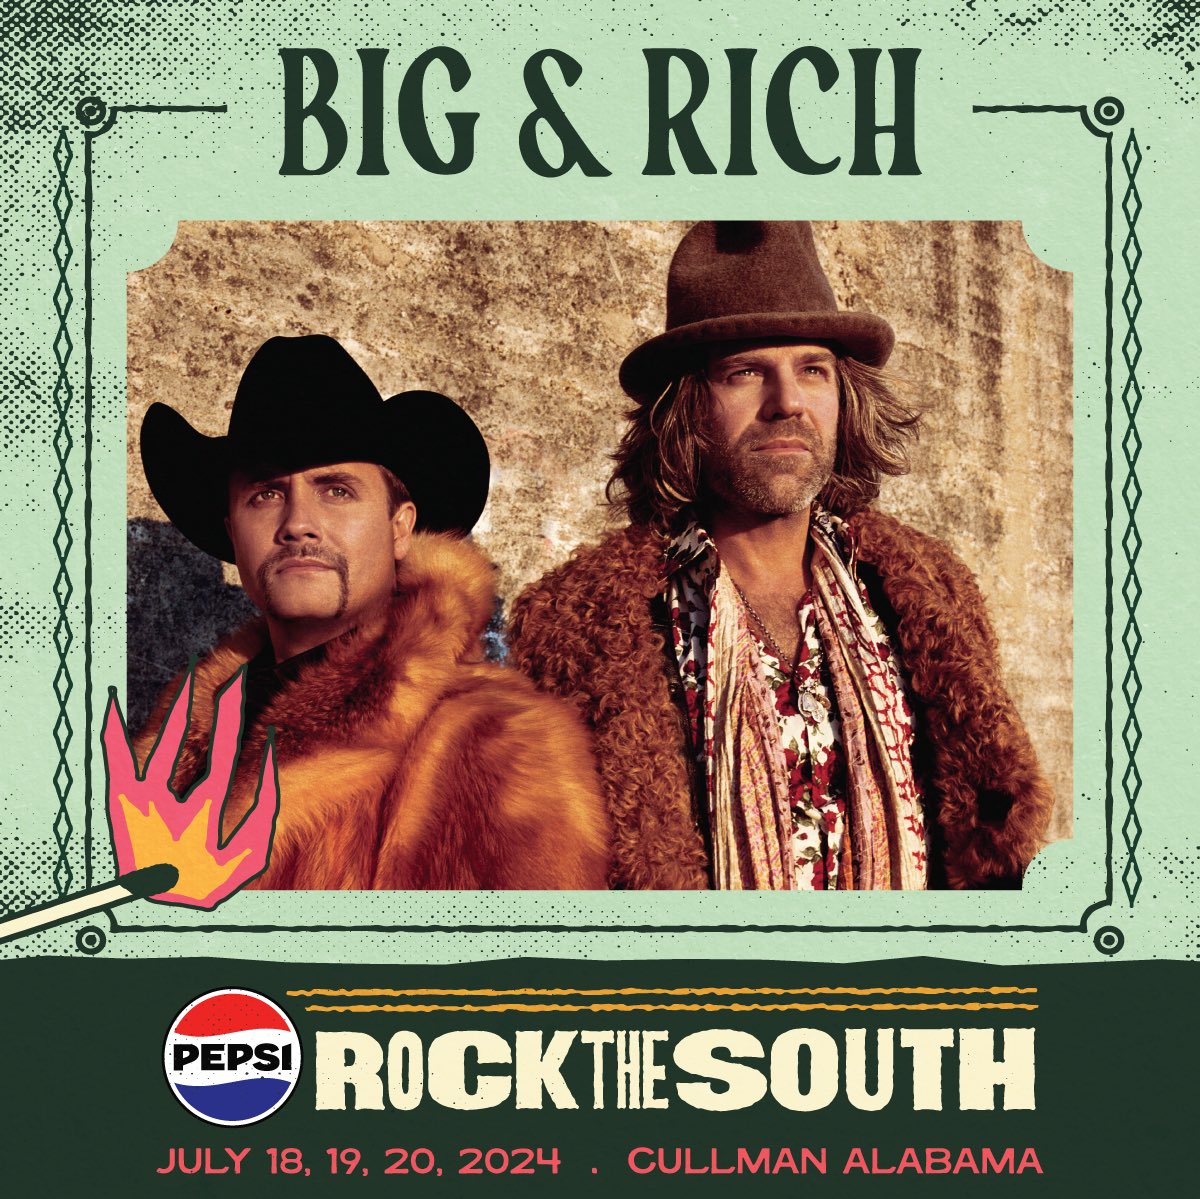 'Rock the South is back! We're pumped to be at the Biggest Party in the South next July. Tickets are on sale this Friday (11/3)!' Tickets/Info at - rockthesouth.com #bigandrich